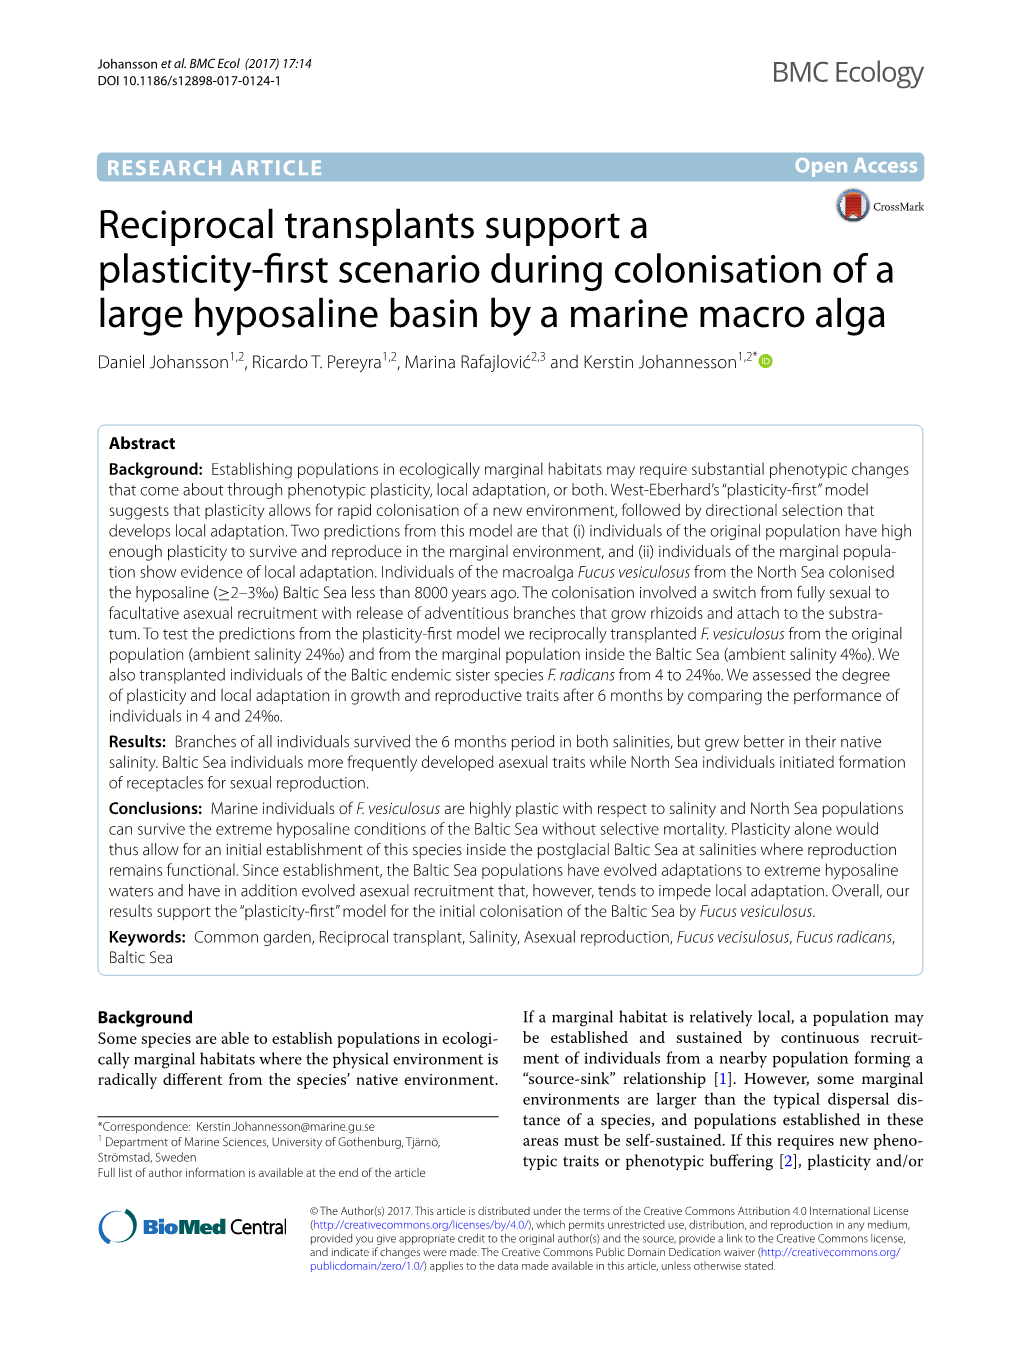 Reciprocal Transplants Support a Plasticity-First Scenario During